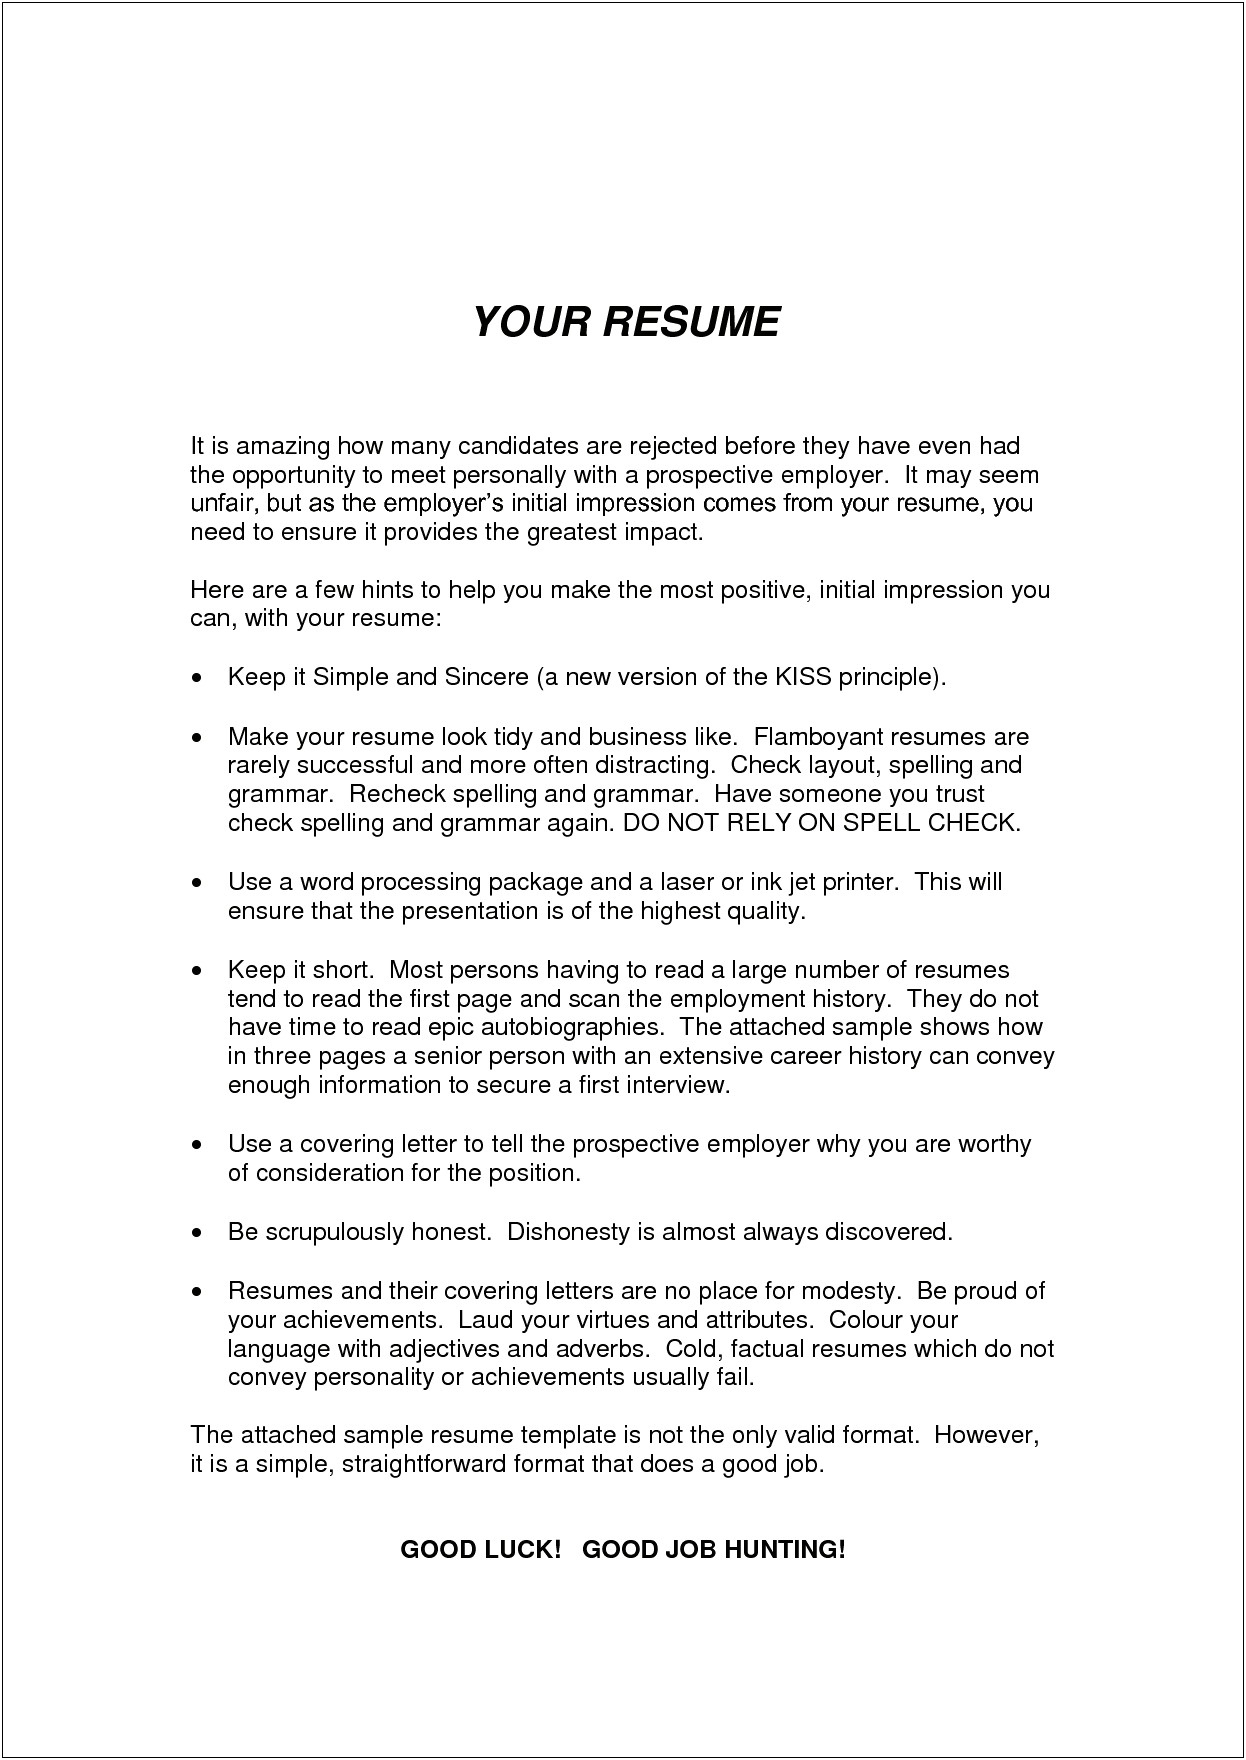 Sample Resumes For Gaps In Employment